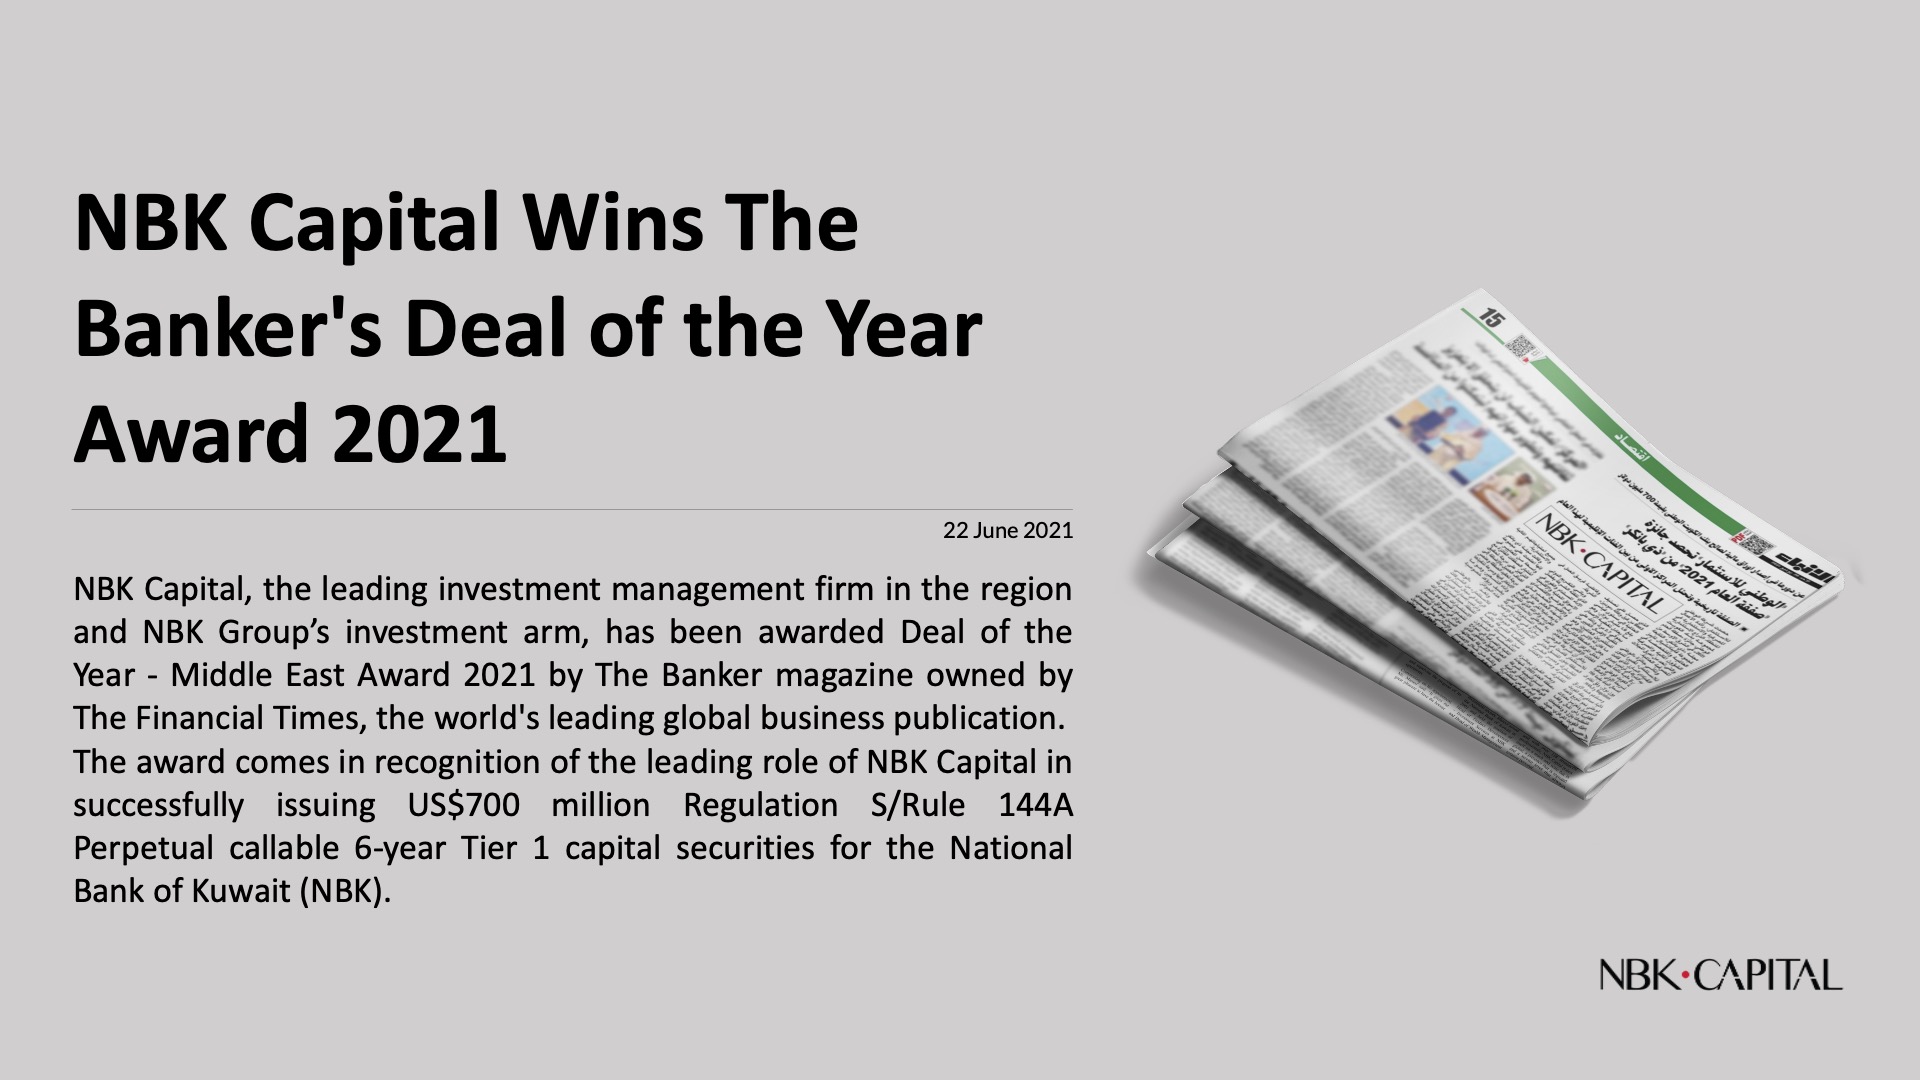 NBK Capital Wins The Banker's Deal of the Year Award 2021